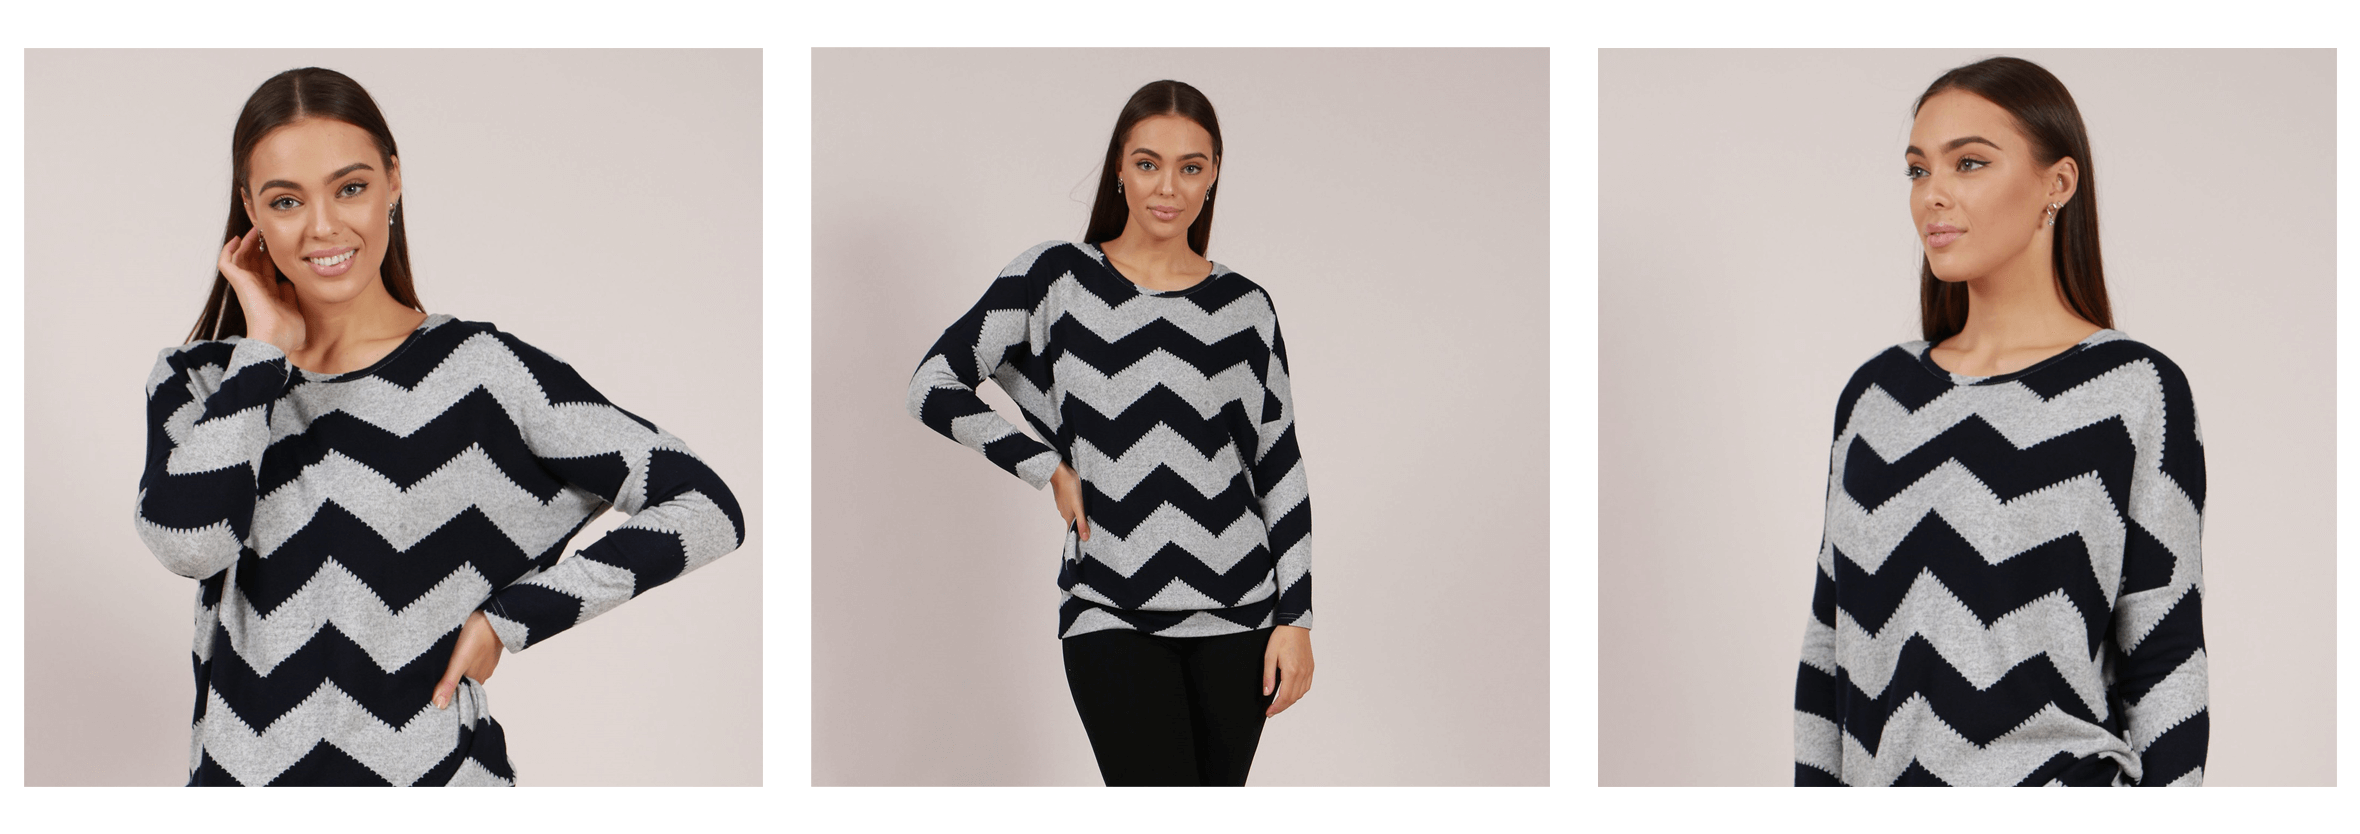 EOFYS Blowout - Zigzag Printed Top - Femme Connection